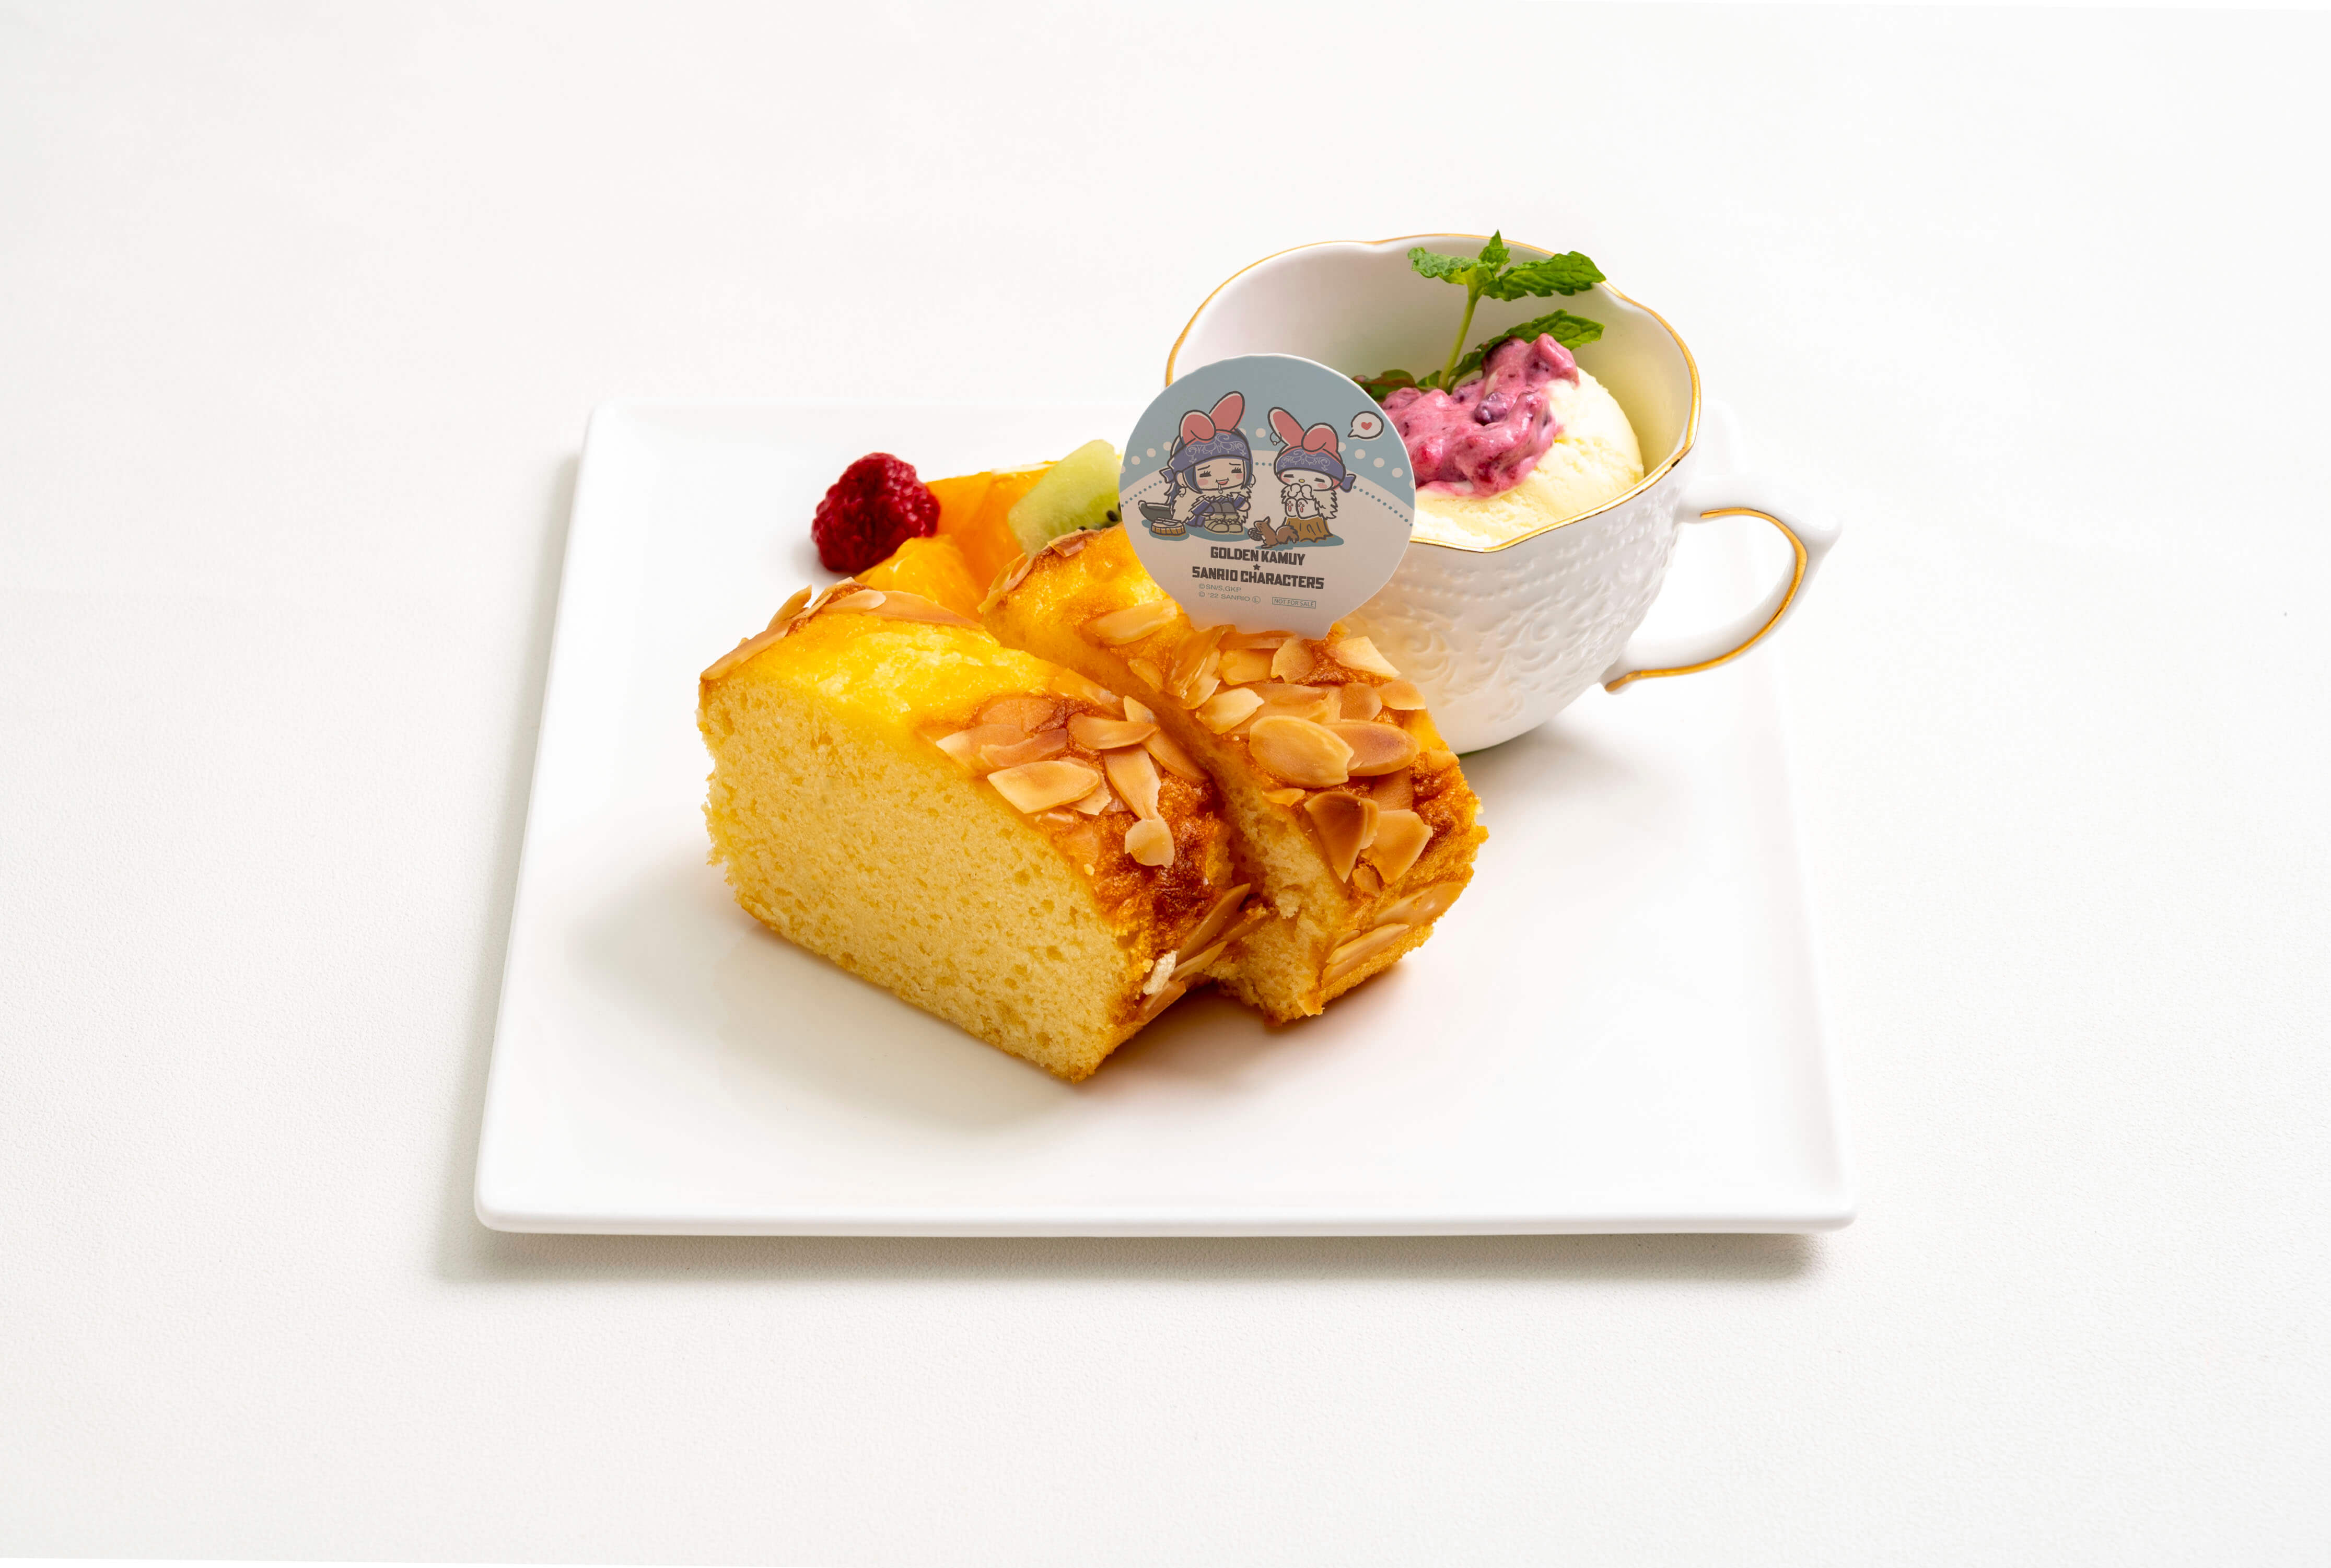 Ryokotomo - 1656301699 894 15fbf46b golden kamuy x sanrio characters collaboration cafe to open in